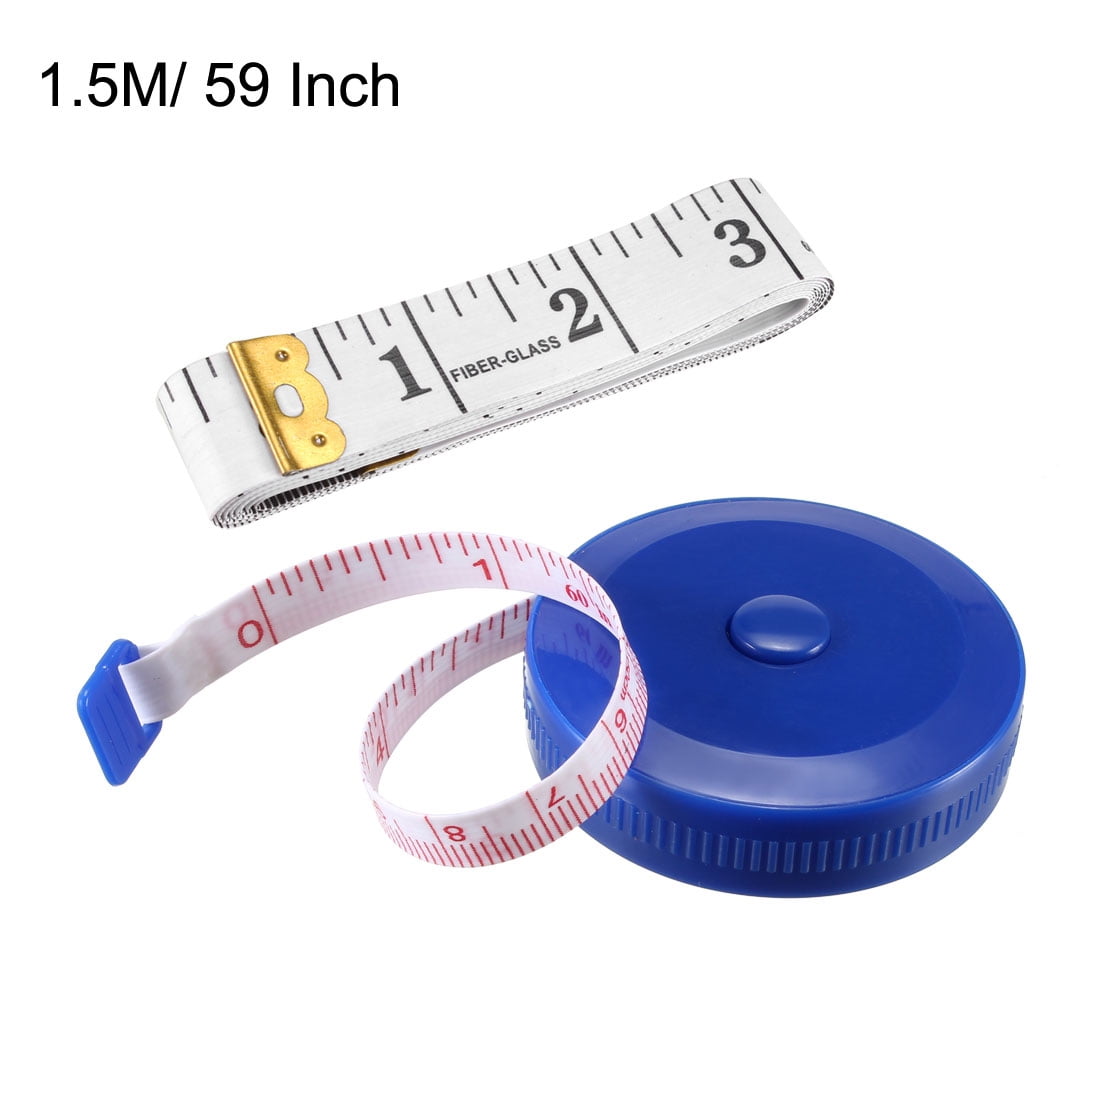 Ophthalmic Equipment, Veatch Cloth Tape Measurer